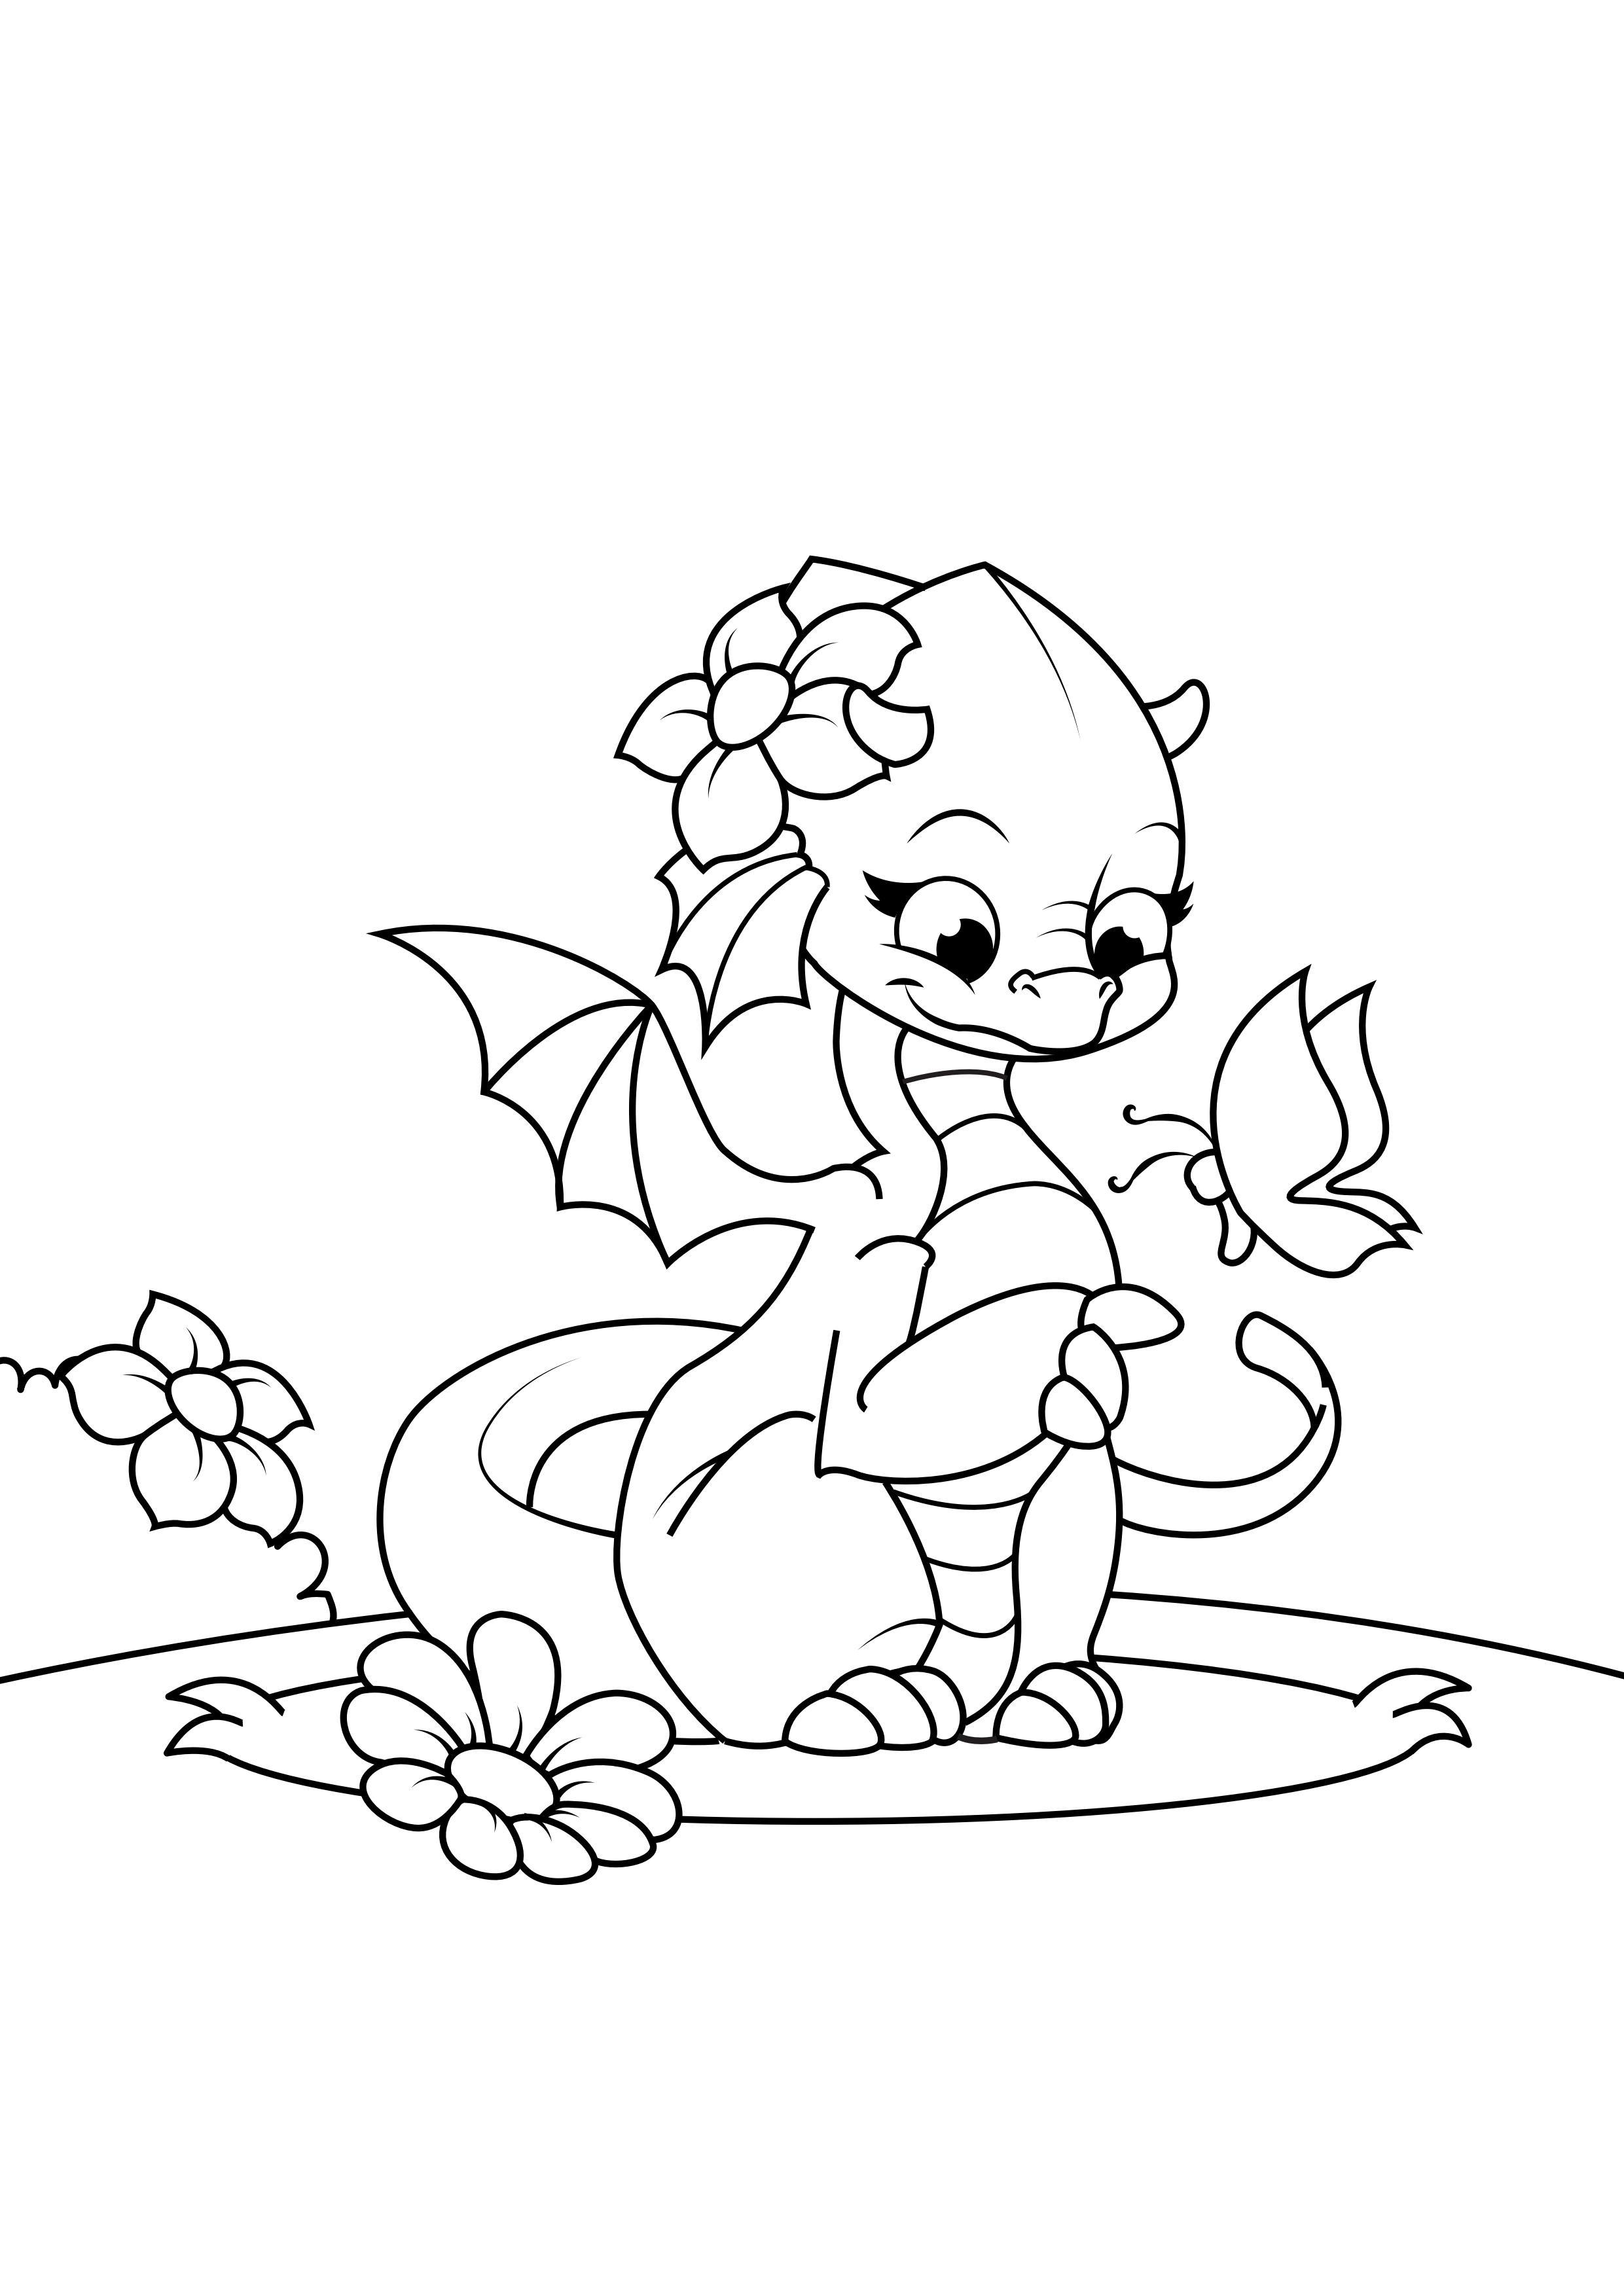 Coloring page dragon girl with butterfly